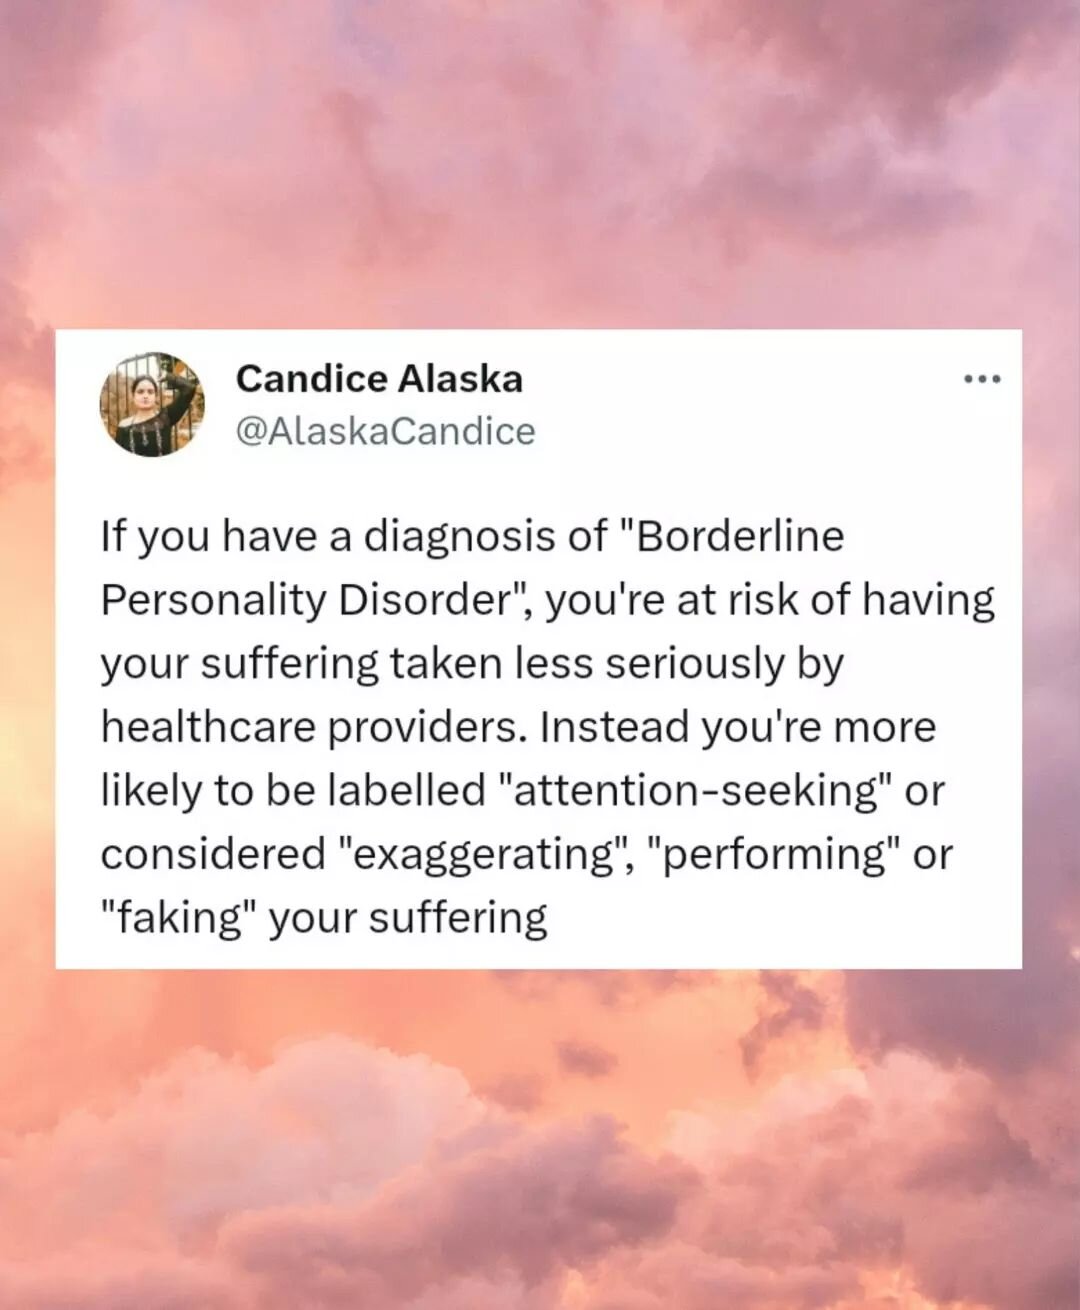 CWs d&euro;ath, SH, medical neglect and trauma. 

The vast majority of the literature on caring for people diagnosed with BPD is not written by the people who actually bear the diagnosis and continues to promote really harmful, moralising and individ